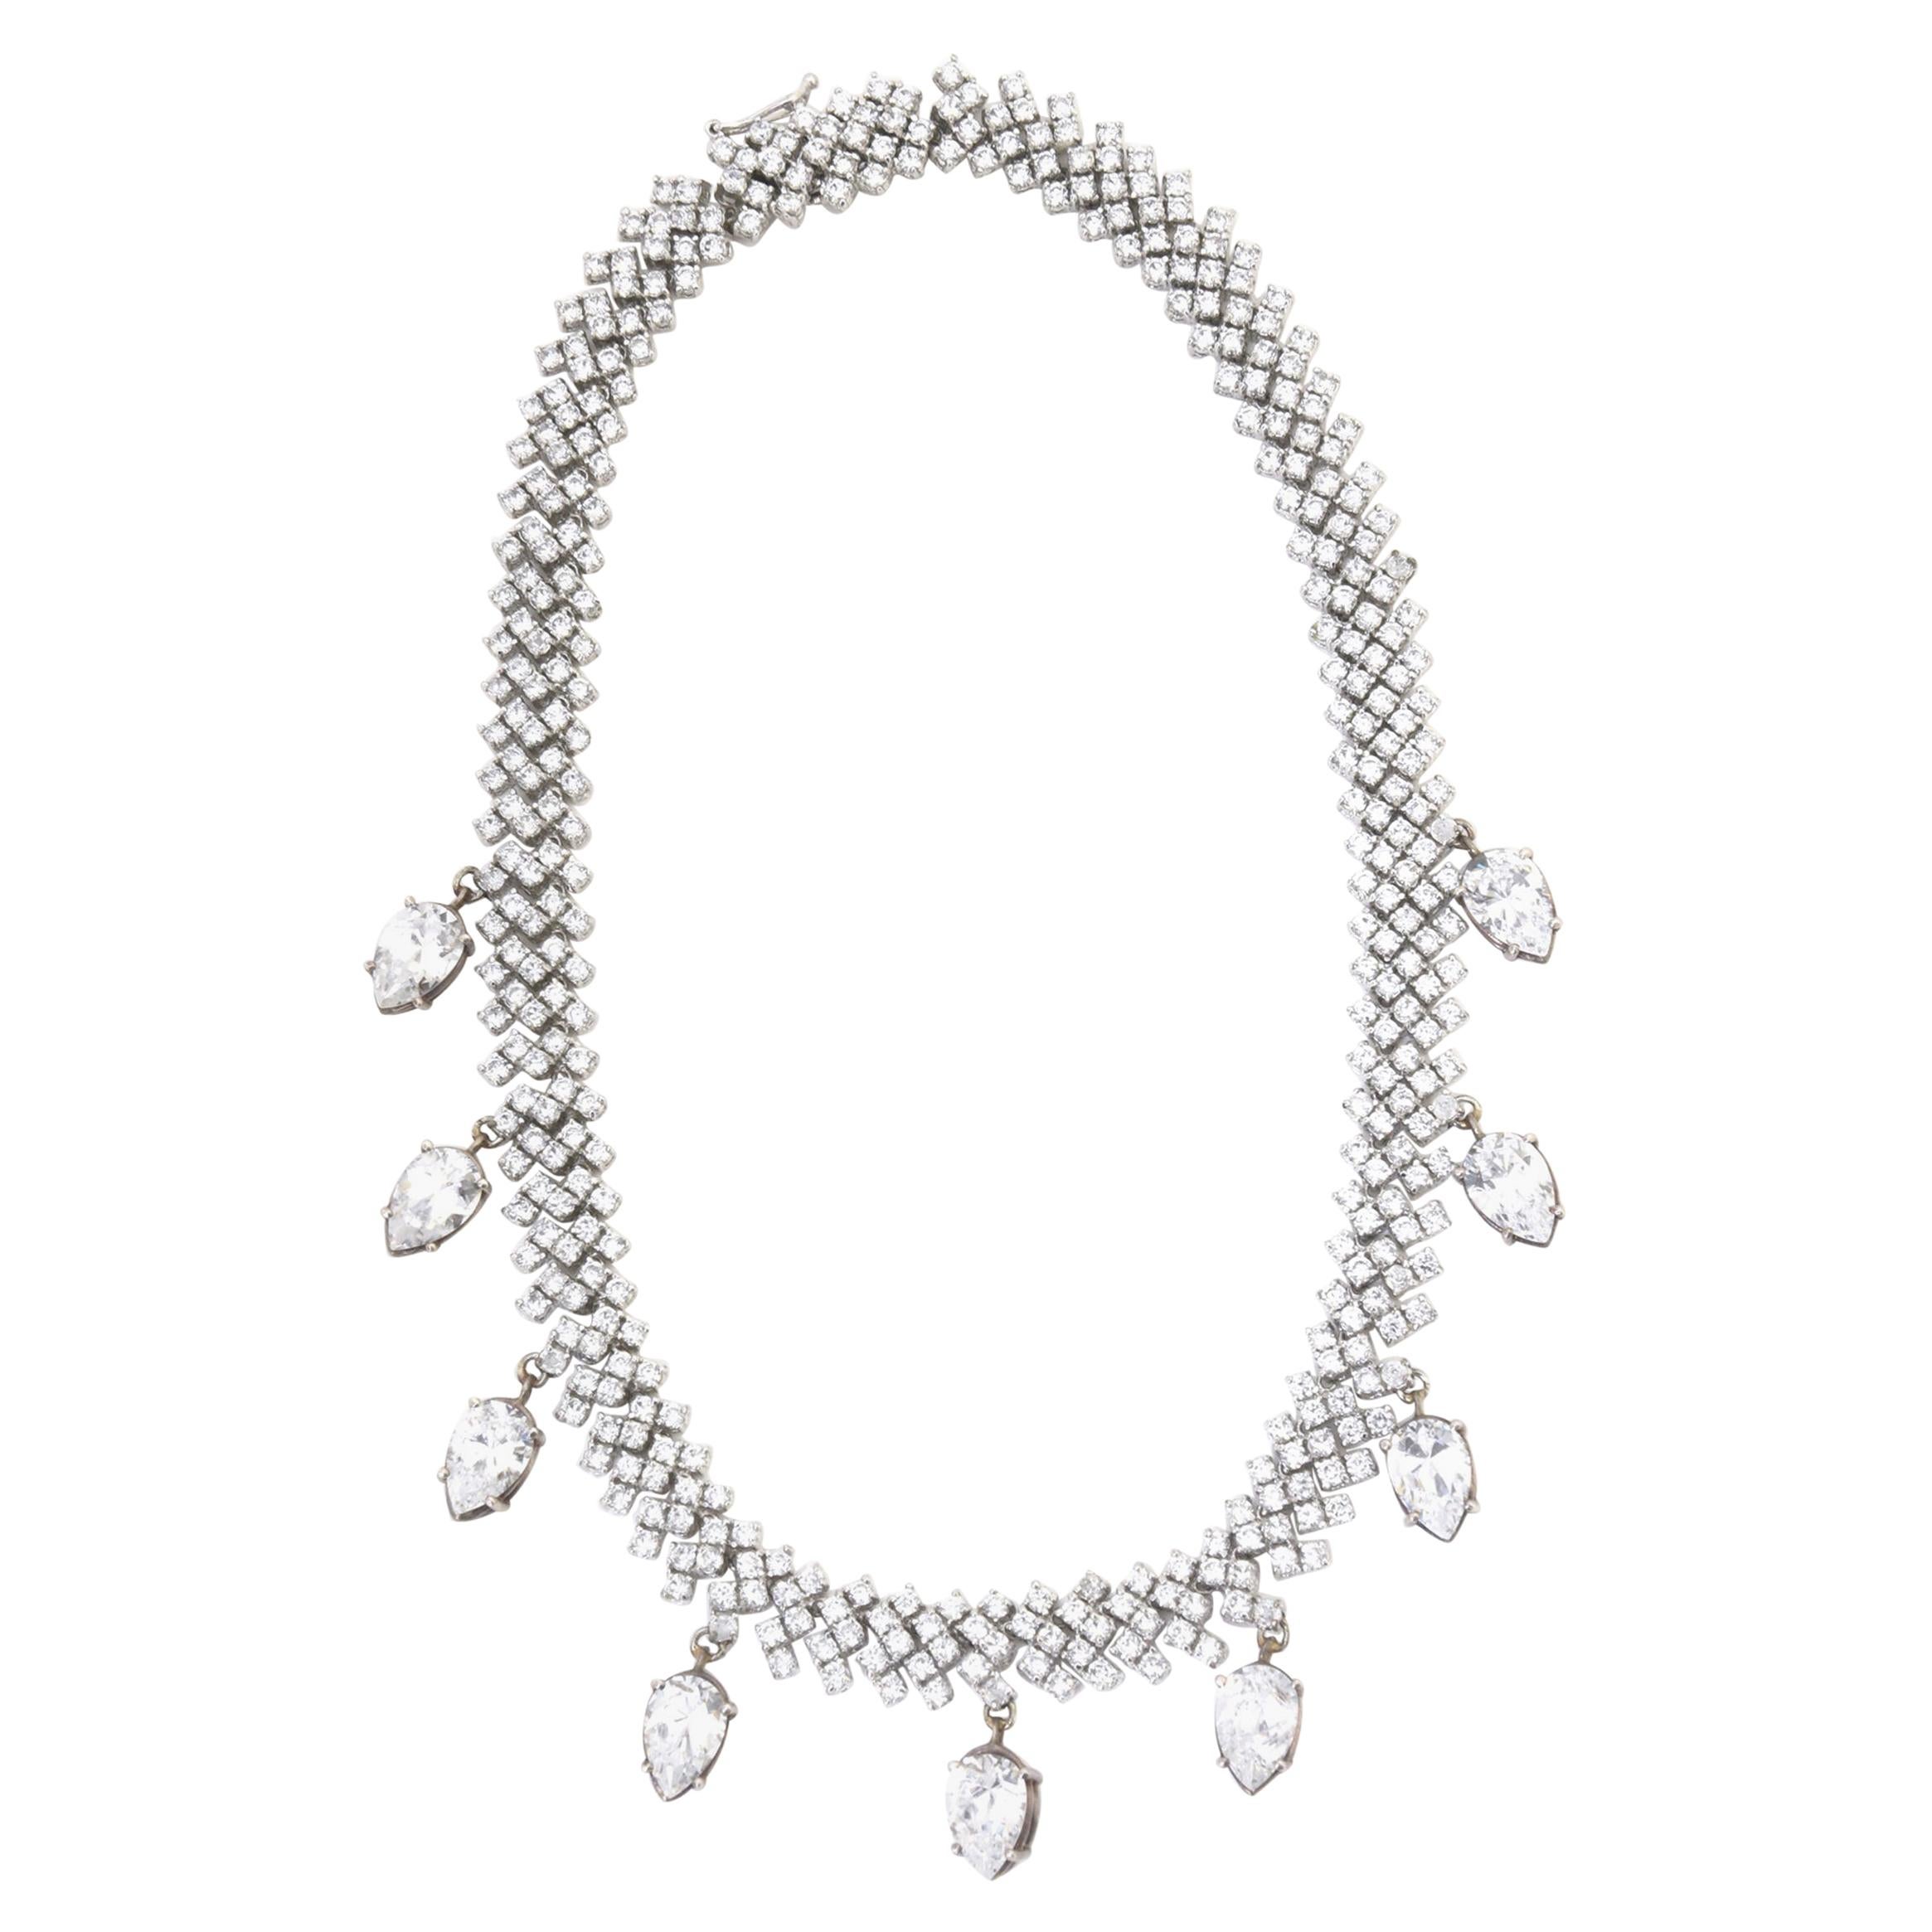 Red Carpet Crystal Tennis Necklace with Pear Shaped Crystal Drops